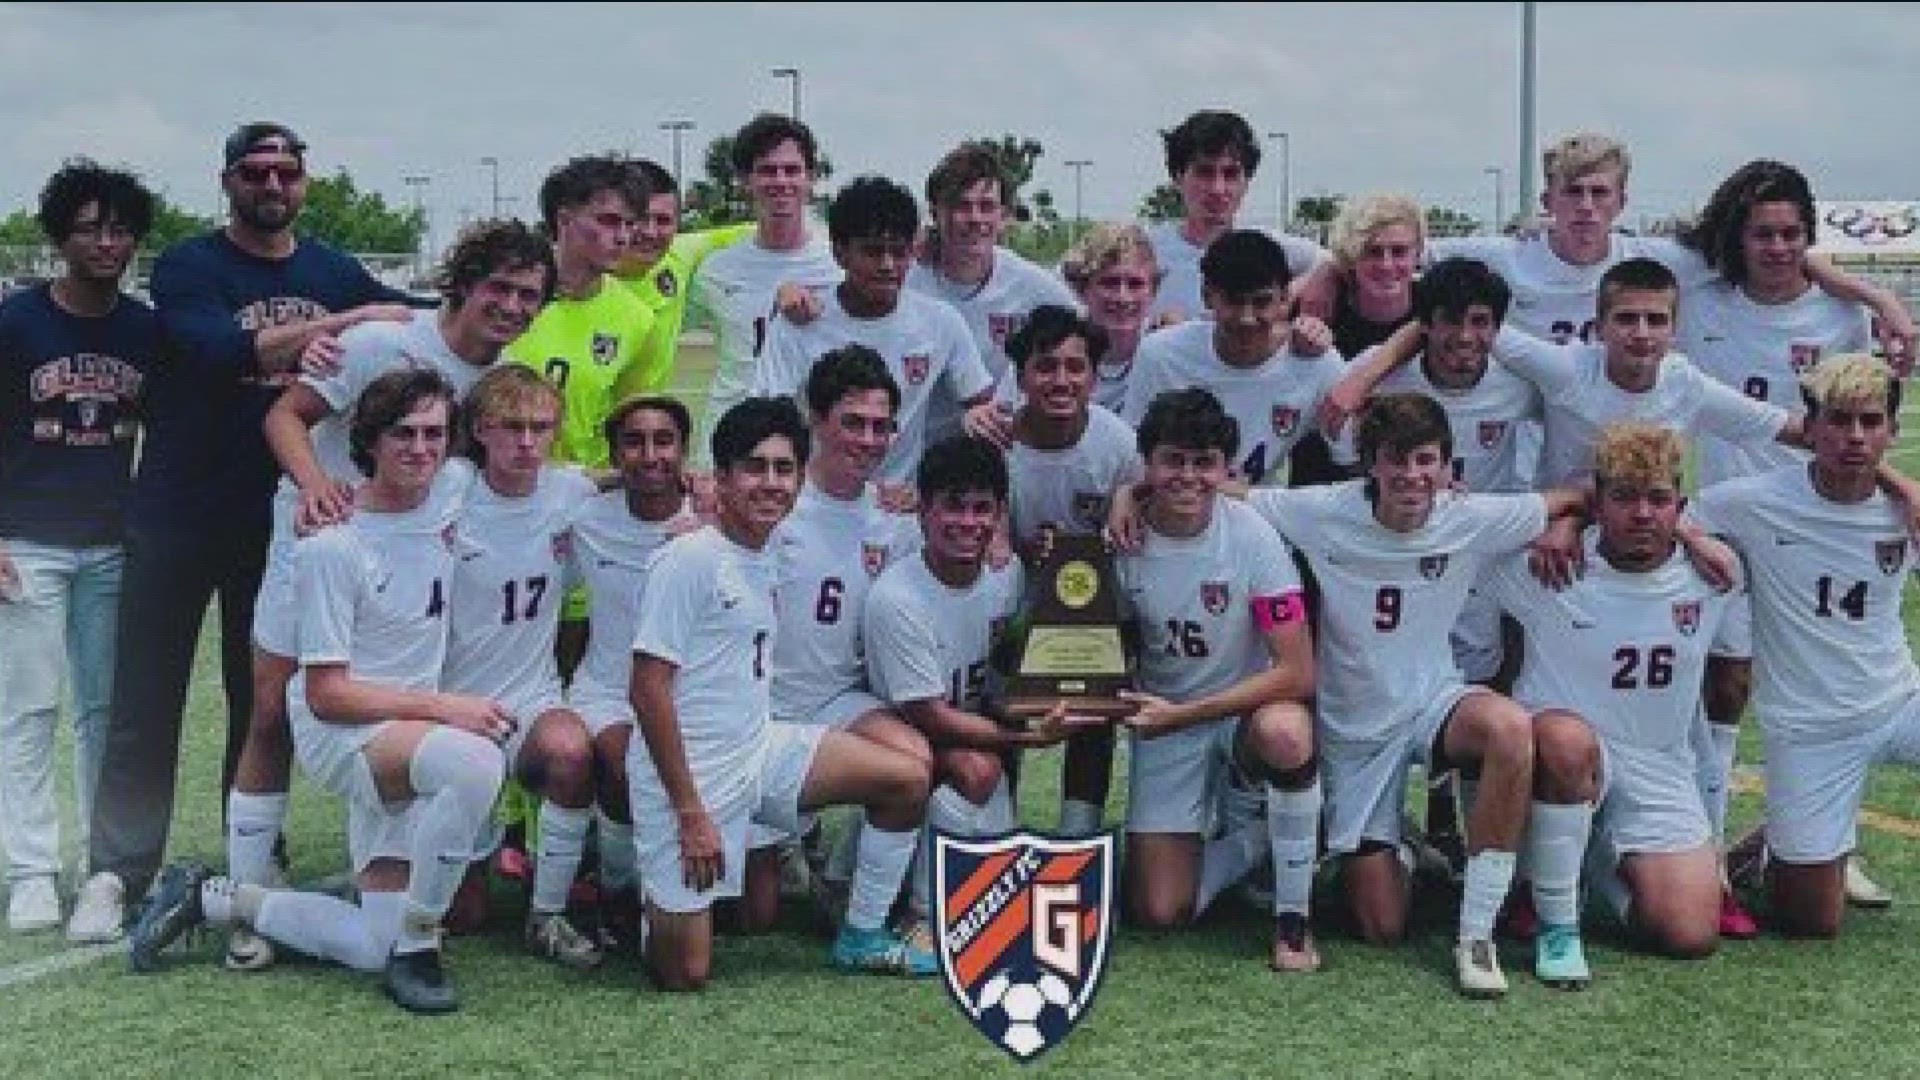 The undefeated Glenn varsity boys soccer team will take on Frisco Wakeland in the 5A state semifinals.